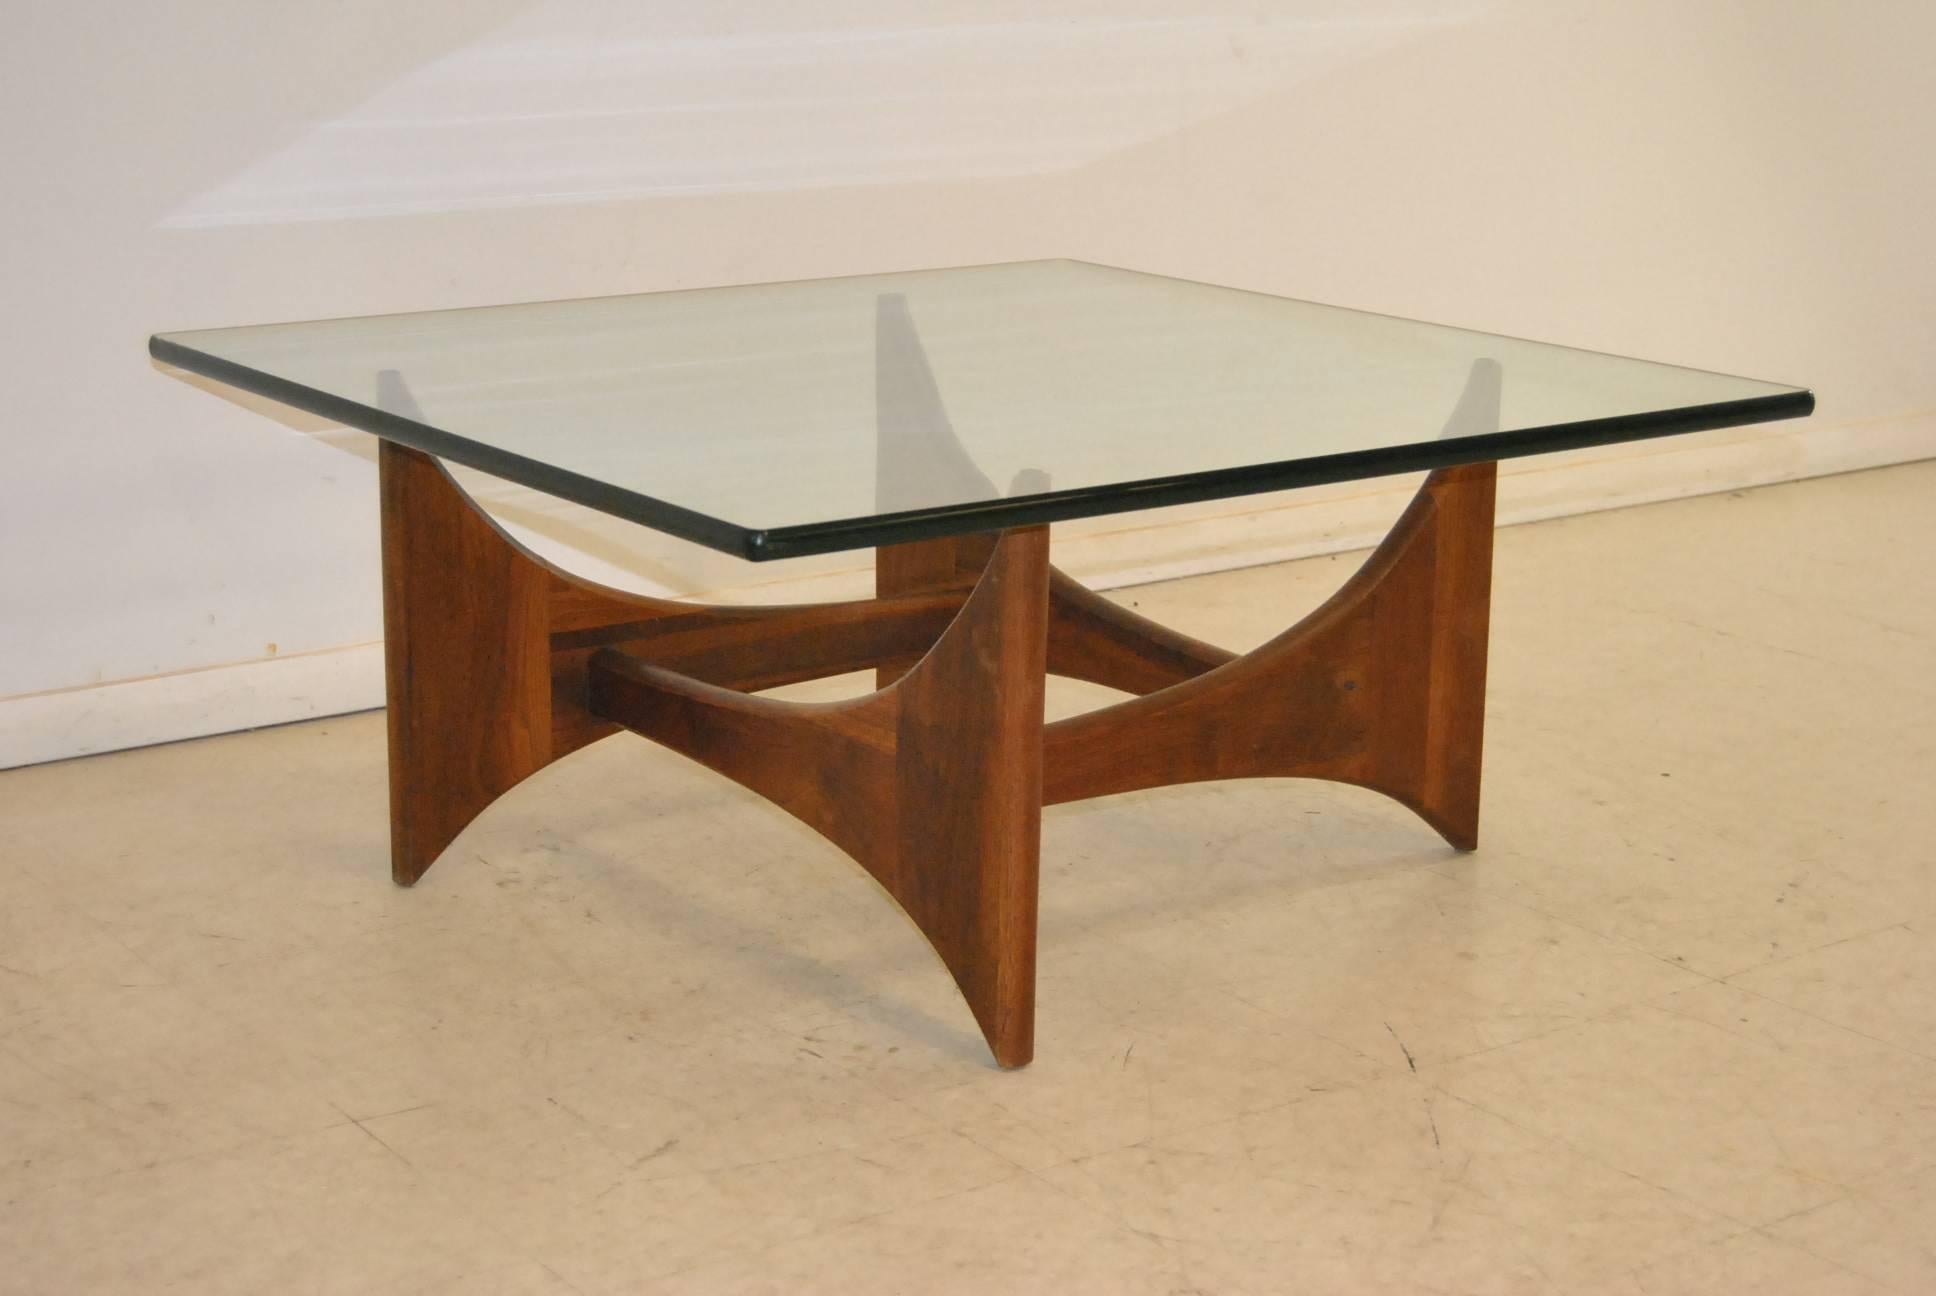 Iconic Mid-Century Modern sculptural coffee or cocktail table of walnut and glass designed by Adrian Pearsall in the 1960s. Its sculptural walnut base, so reminiscent of Noguchi’s style, is still famously Pearsall. The base is comprised of four